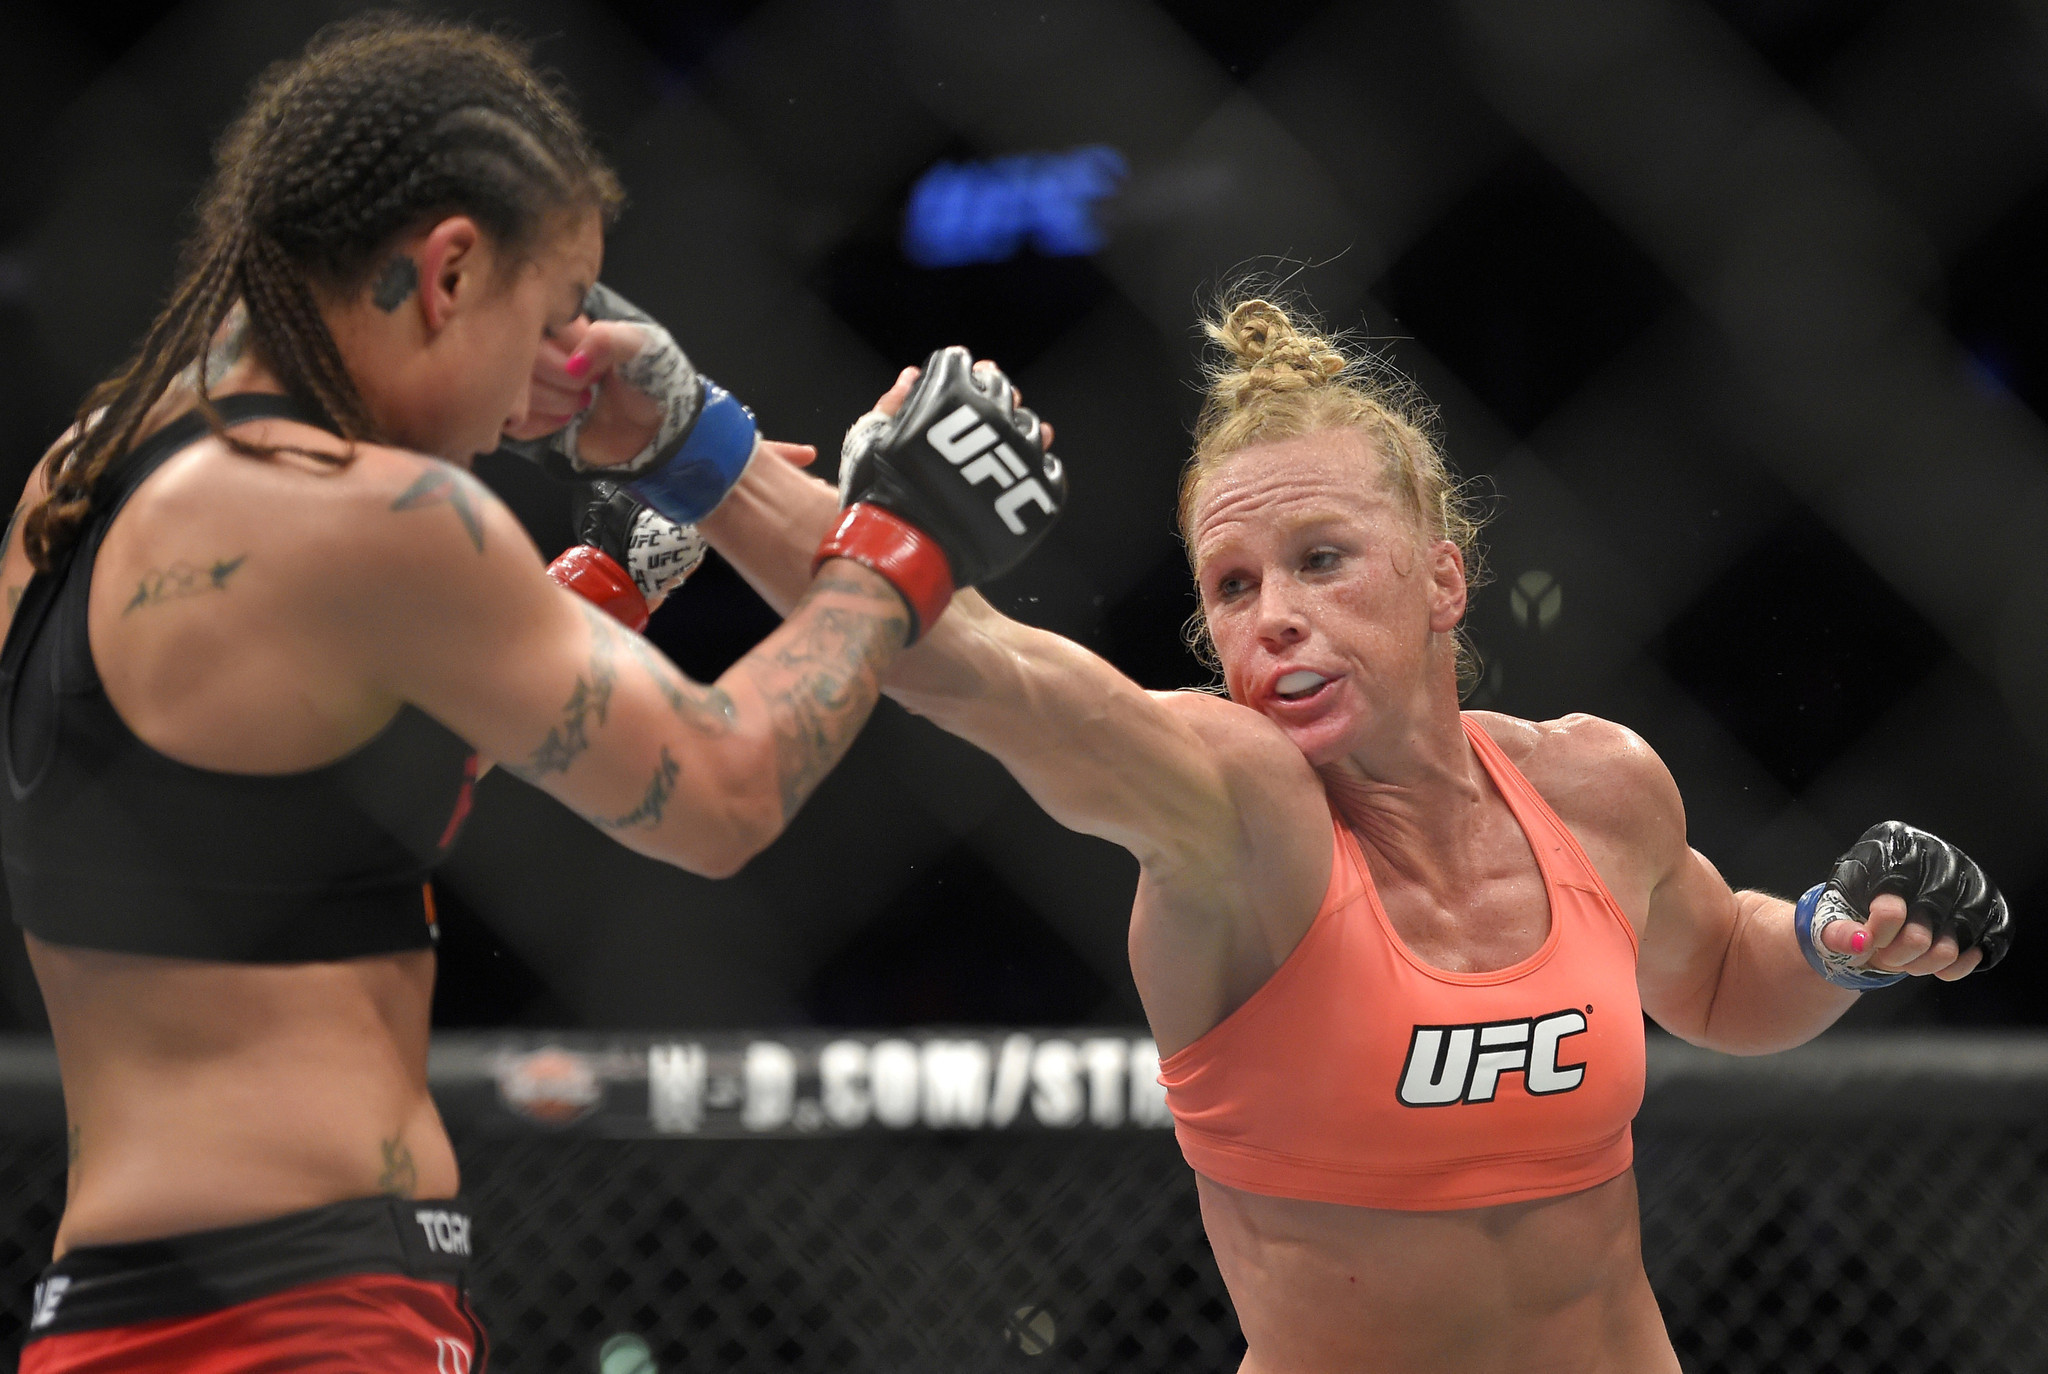 'Excited' Holly Holm says, 'Let's do this,' to Ronda Rousey fight - LA Times2048 x 1374